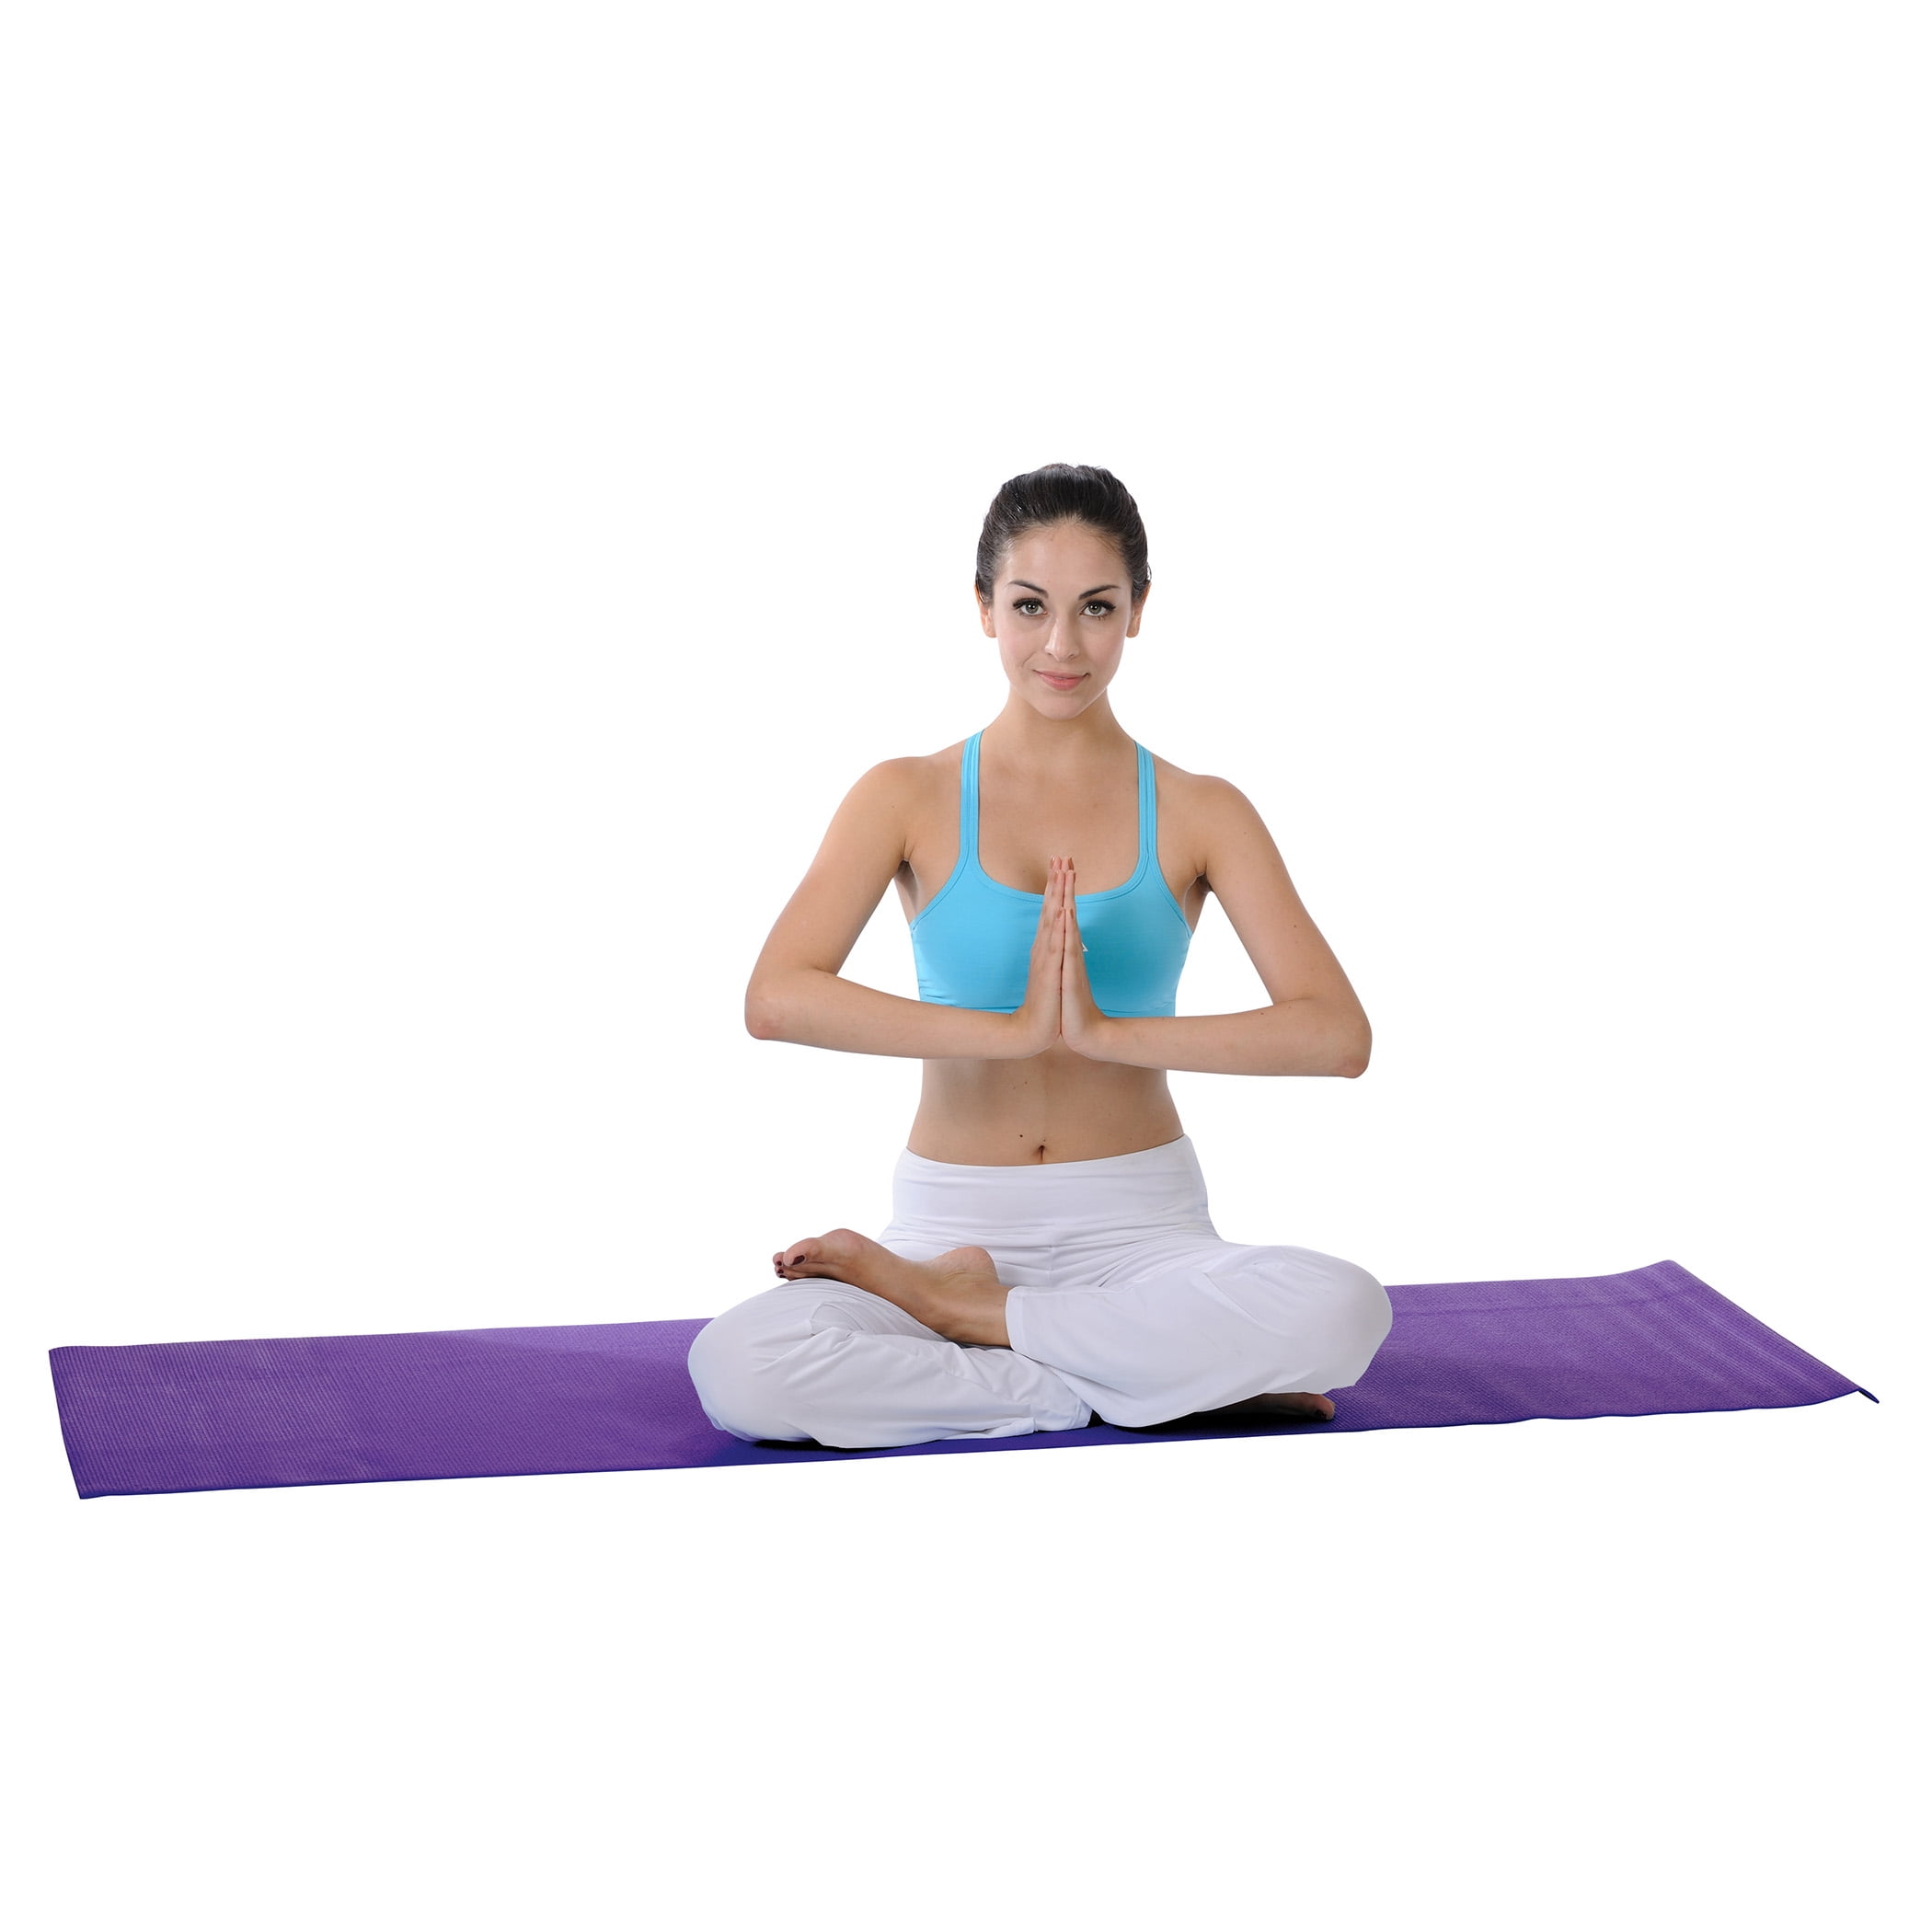 4mm.( Blue , Purple )Color Yoga Mat For Exercise,High-Dencity,Meditation  ,Gym Workout ,Sports,Anti-Skid